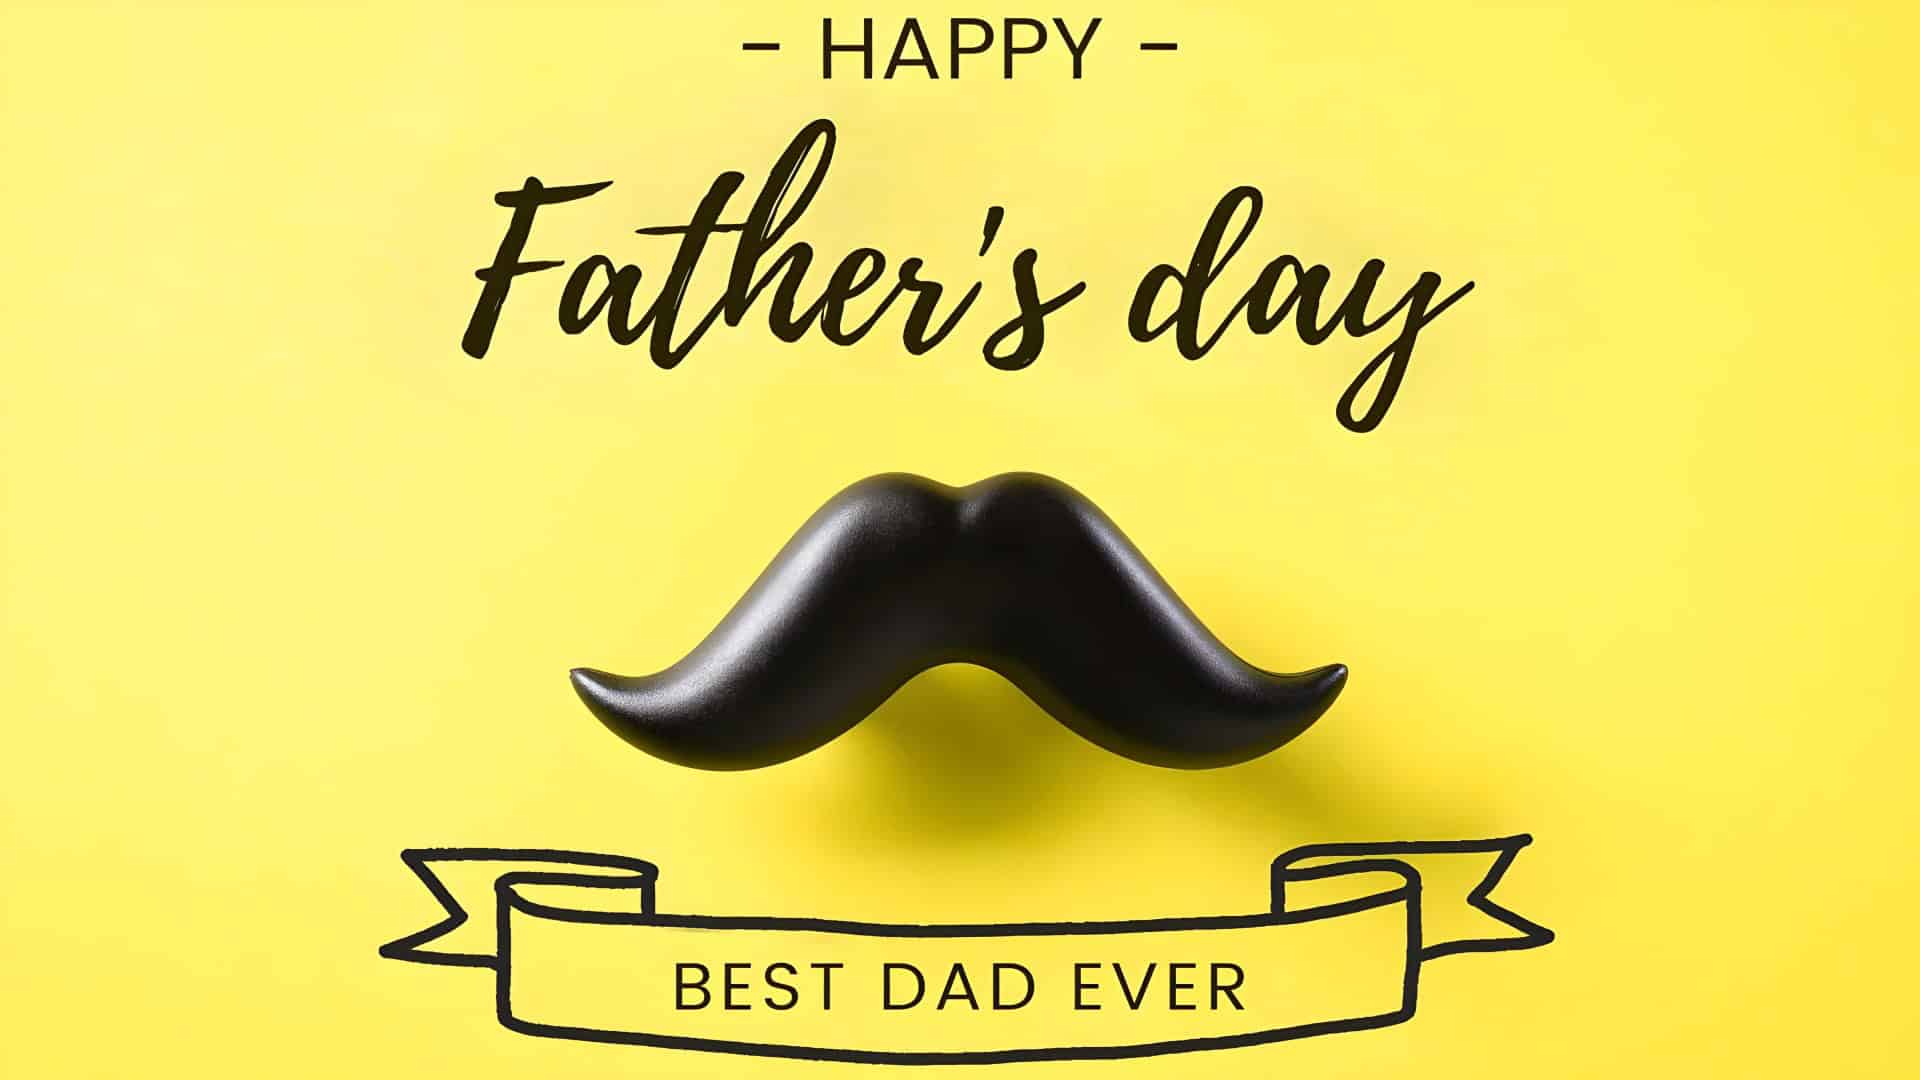 Collections of Happy Father's Day Messages